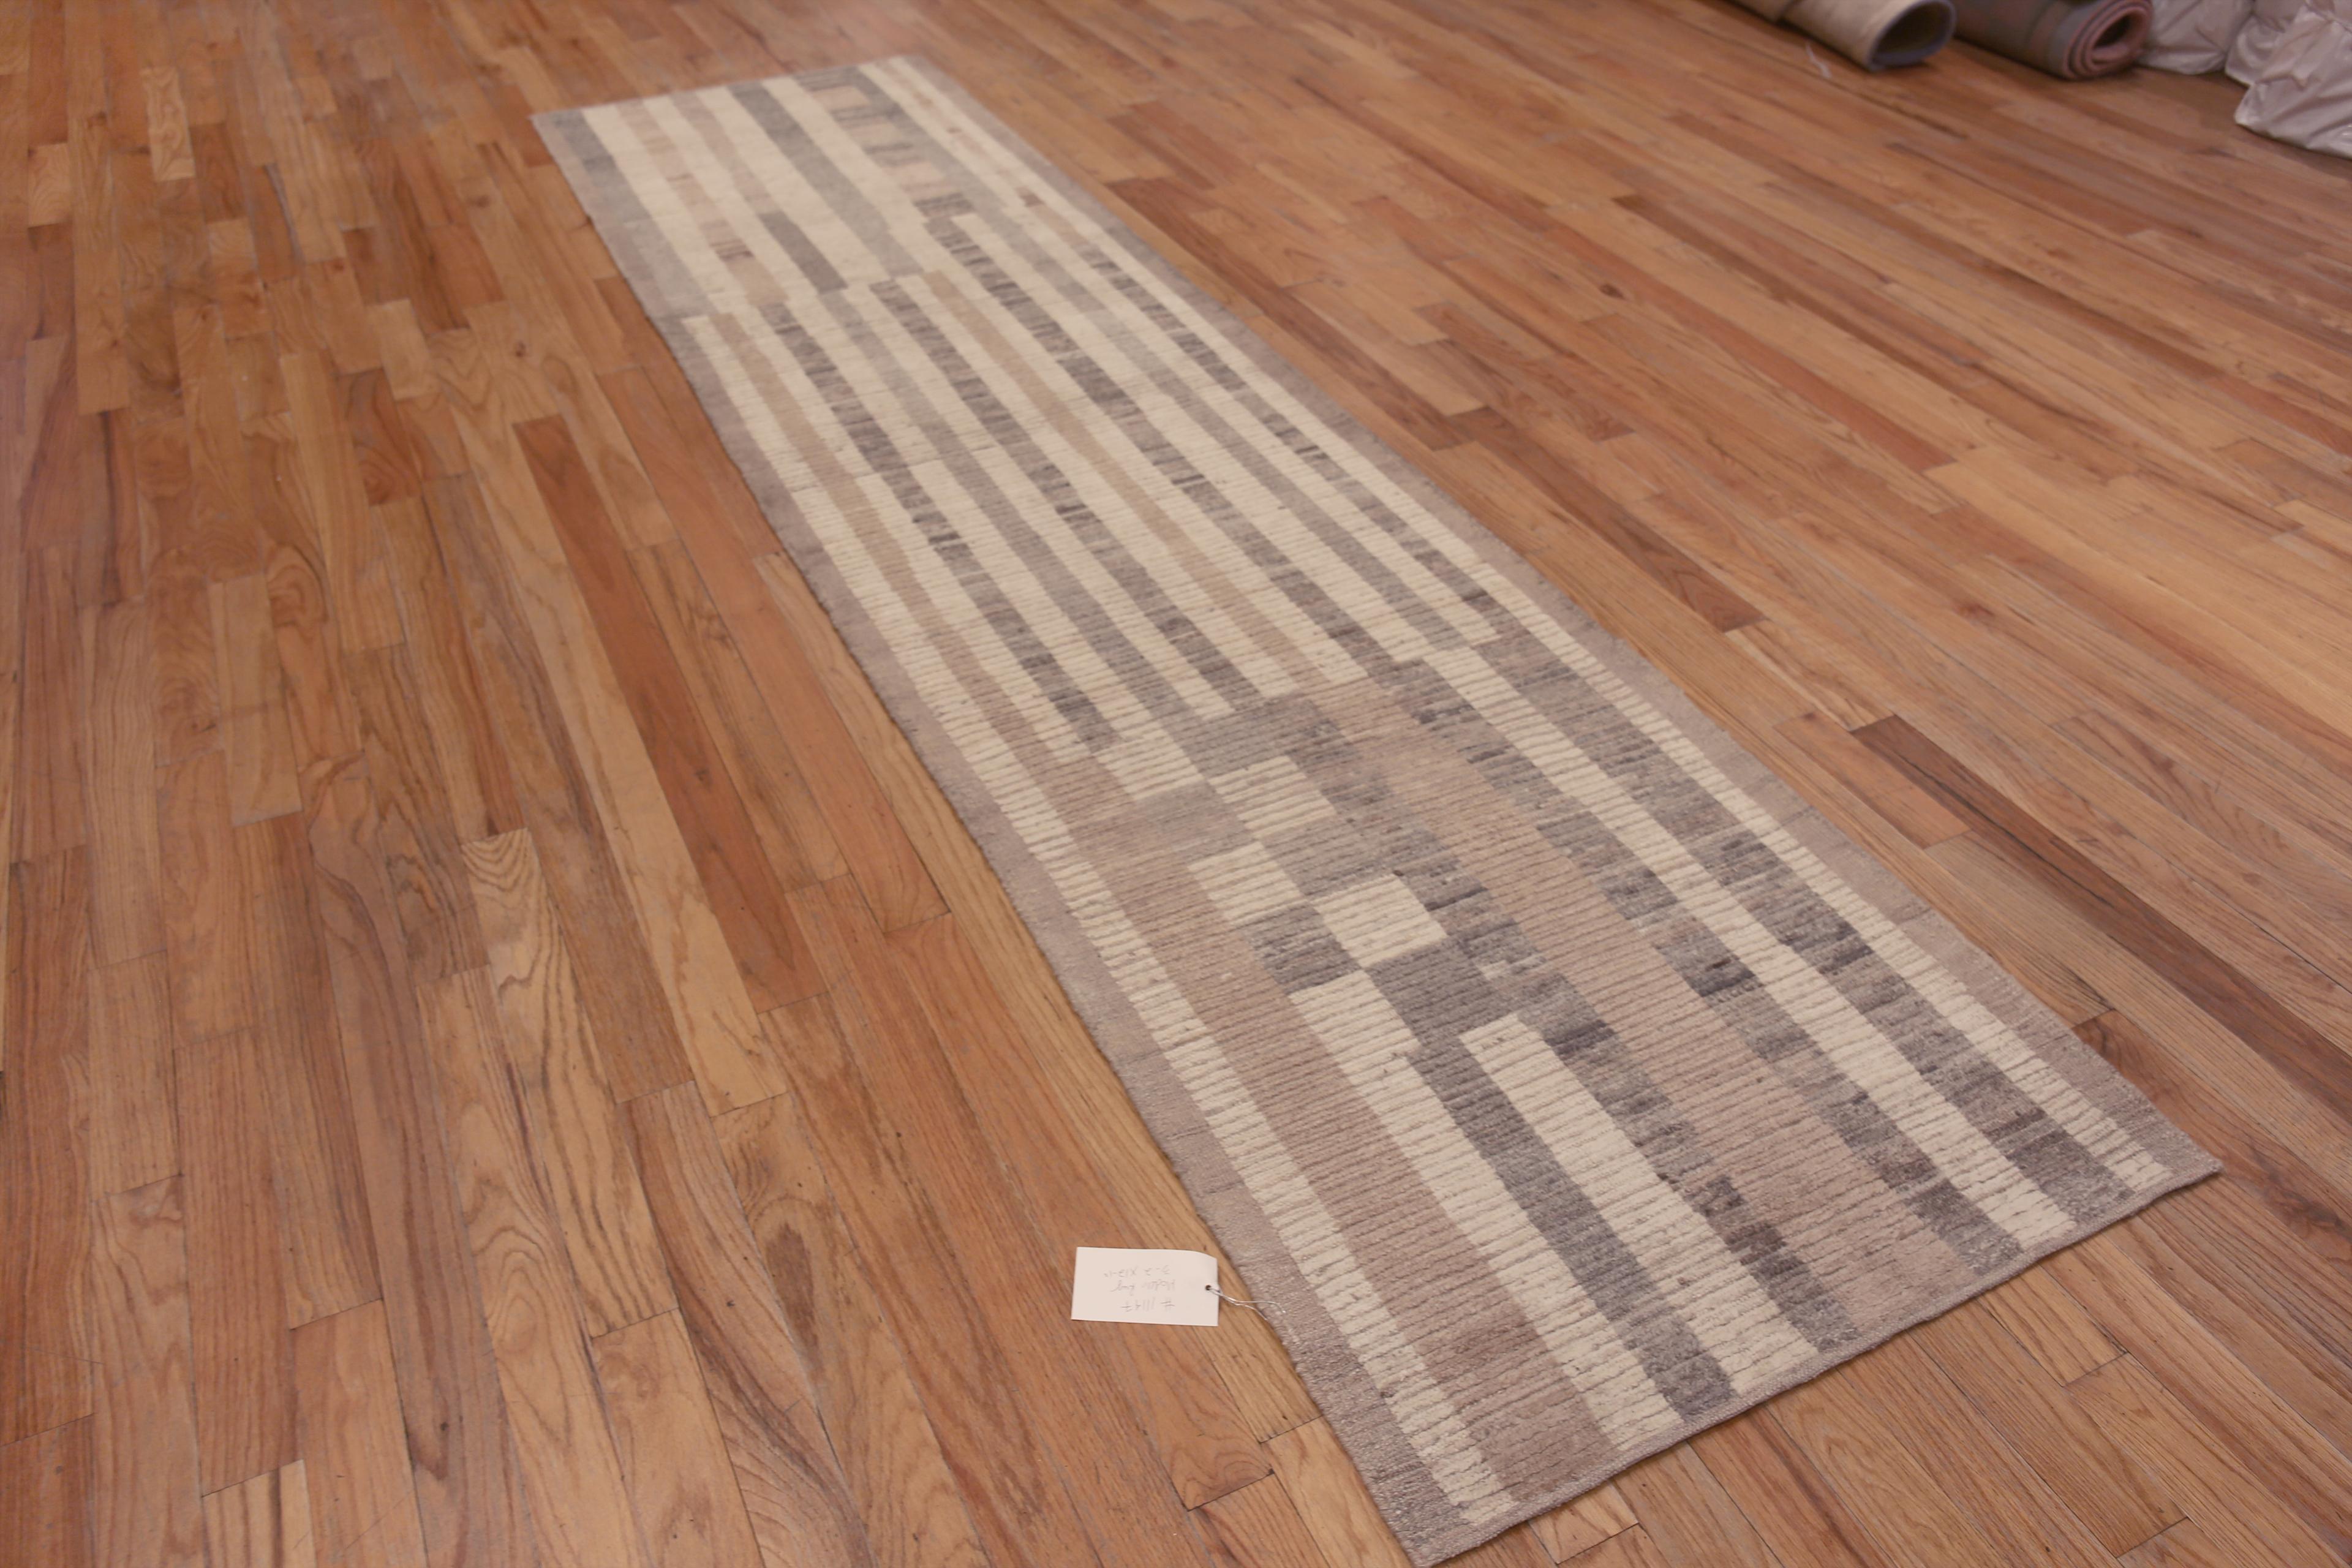 A Beautiful Soft Decorative Light Cream Background and Neutral Color Tribal Geometric Design Modern Hallway Runner Rug, Country of Origin: Central Asia, Circa Date: Modern Rug 